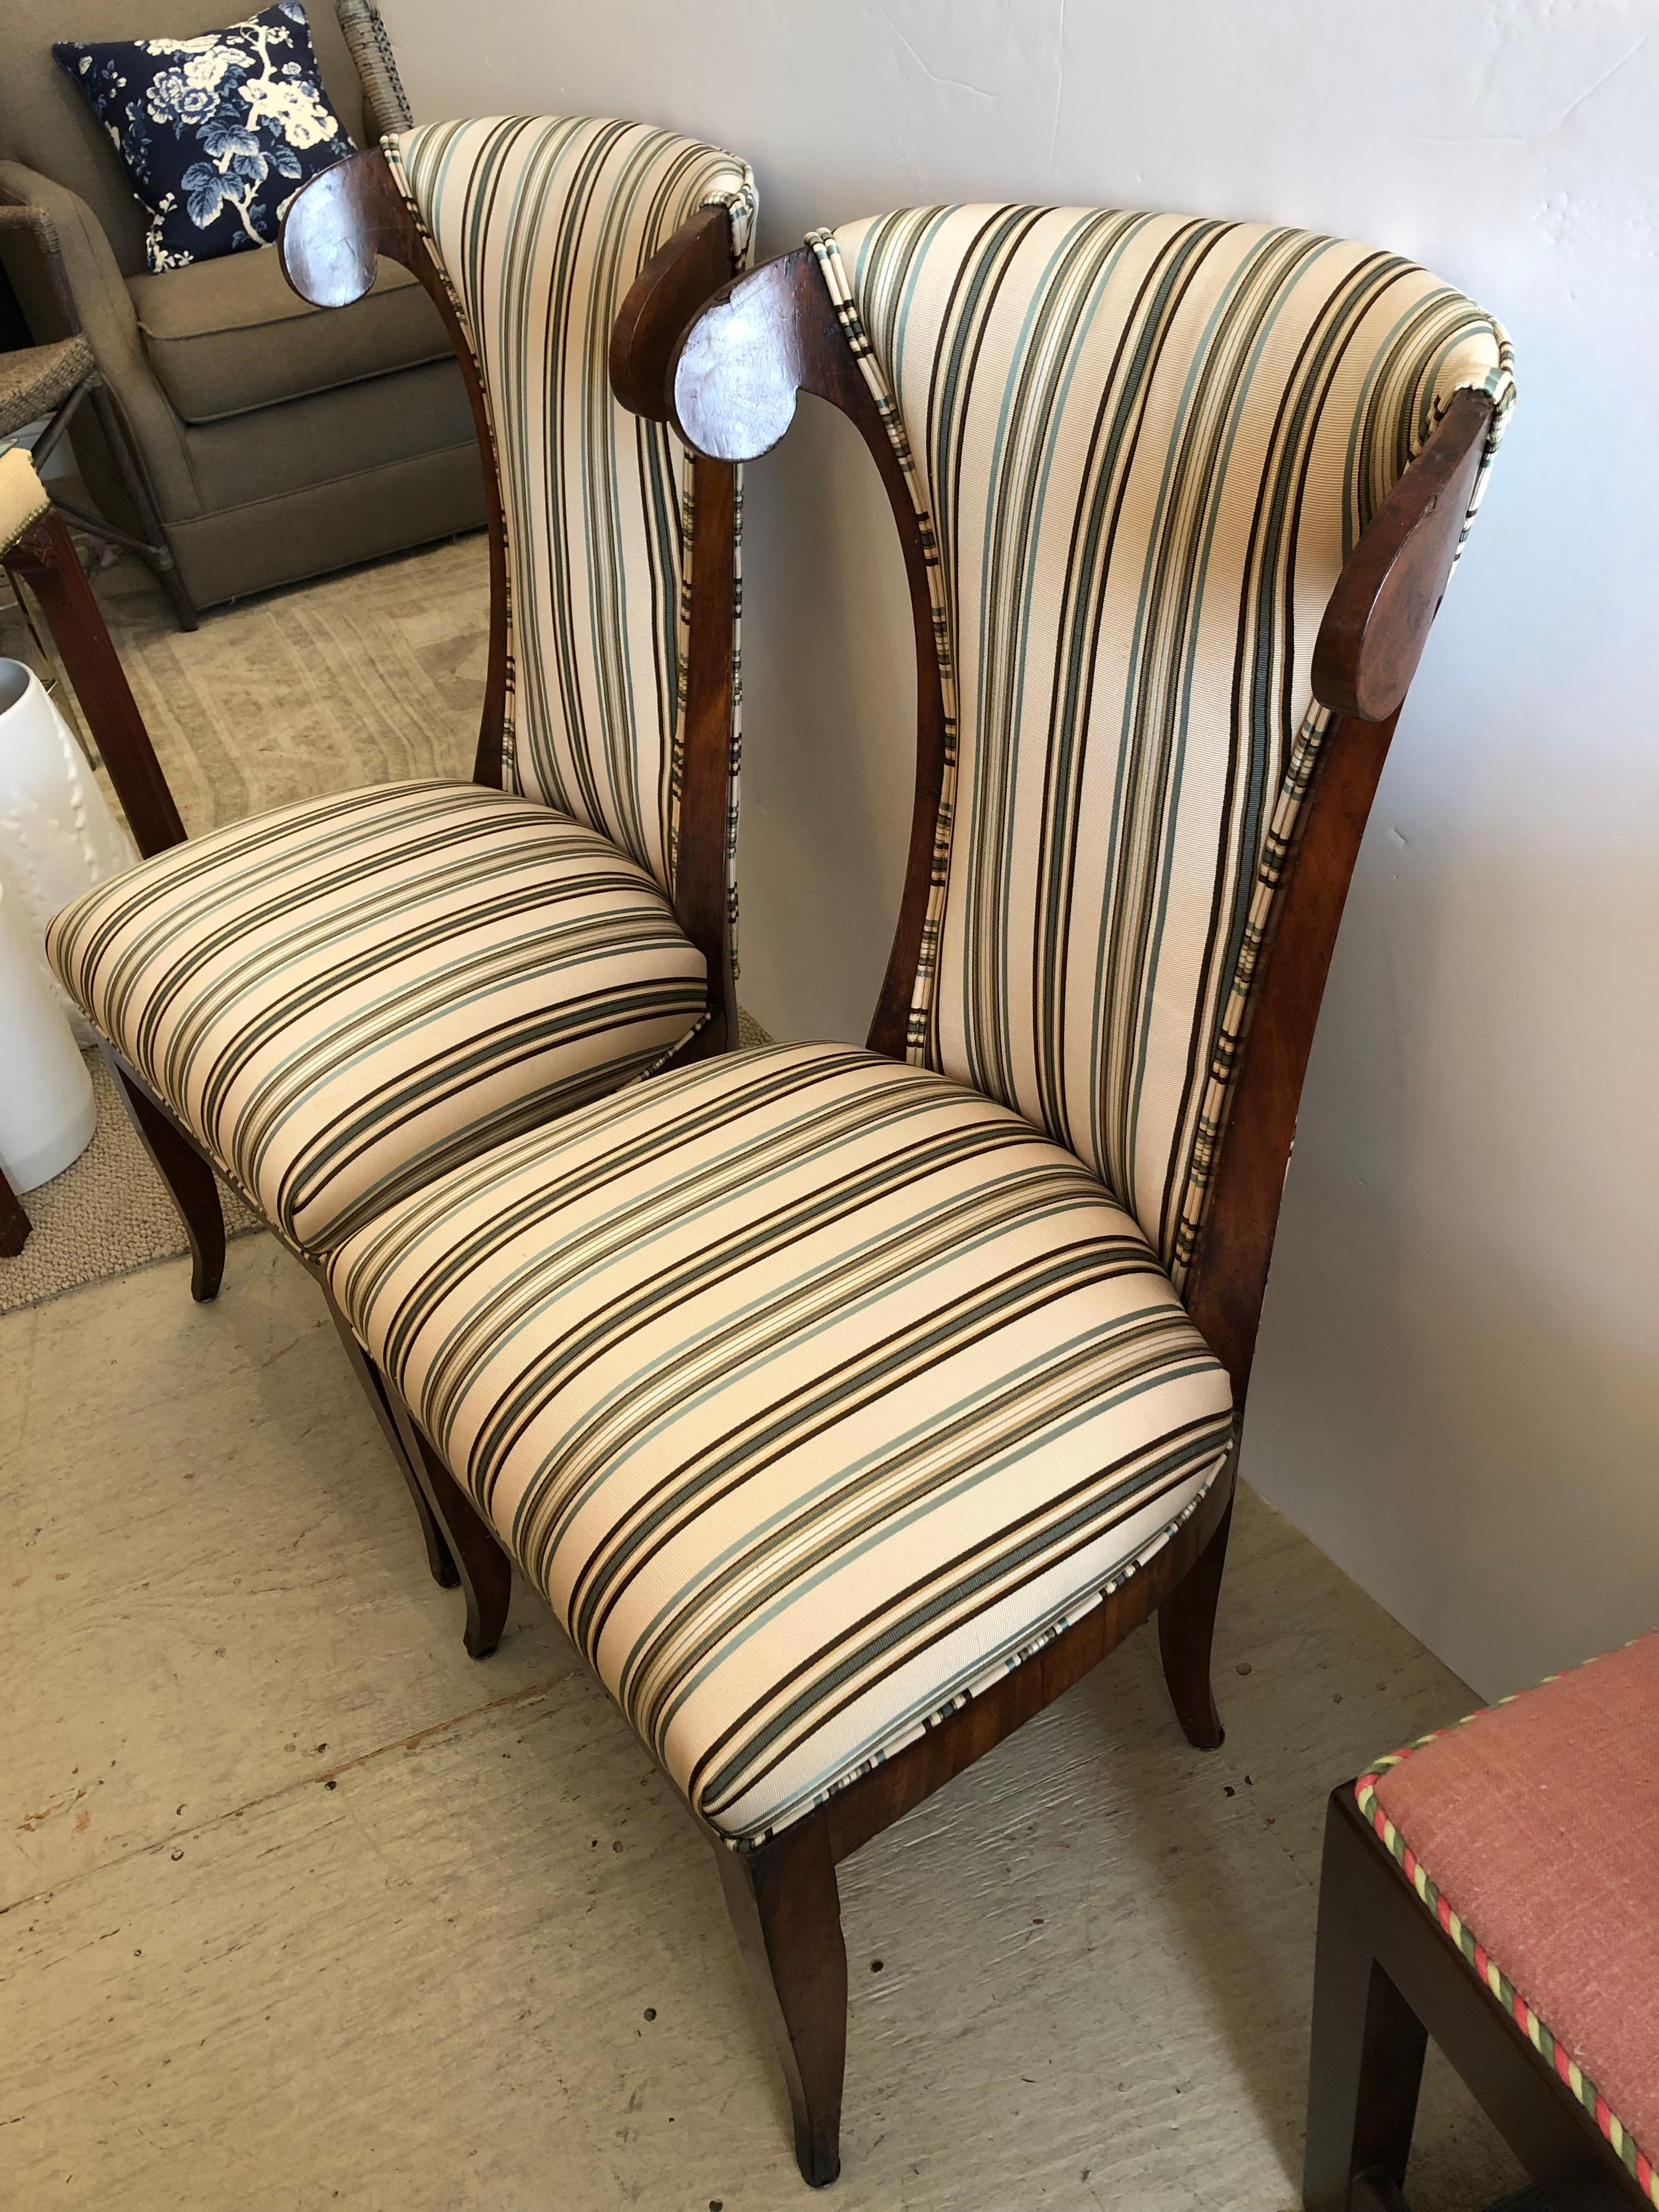 Upholstery Glam Pair of Newly Upholstered Vintage Klismos Style Chairs